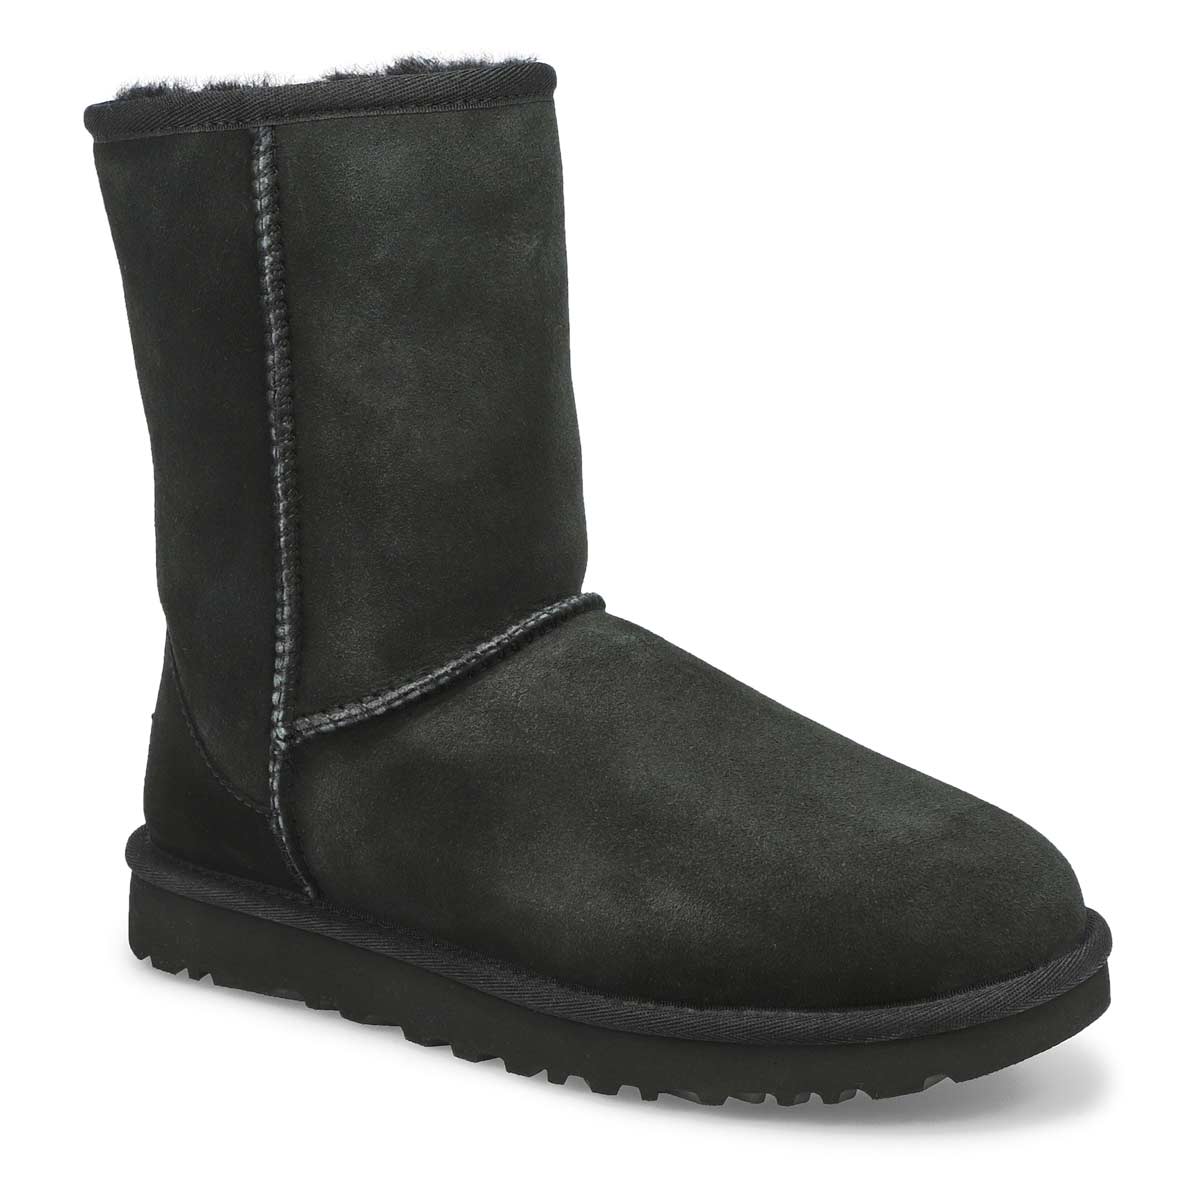 size 5 ugg boots sale